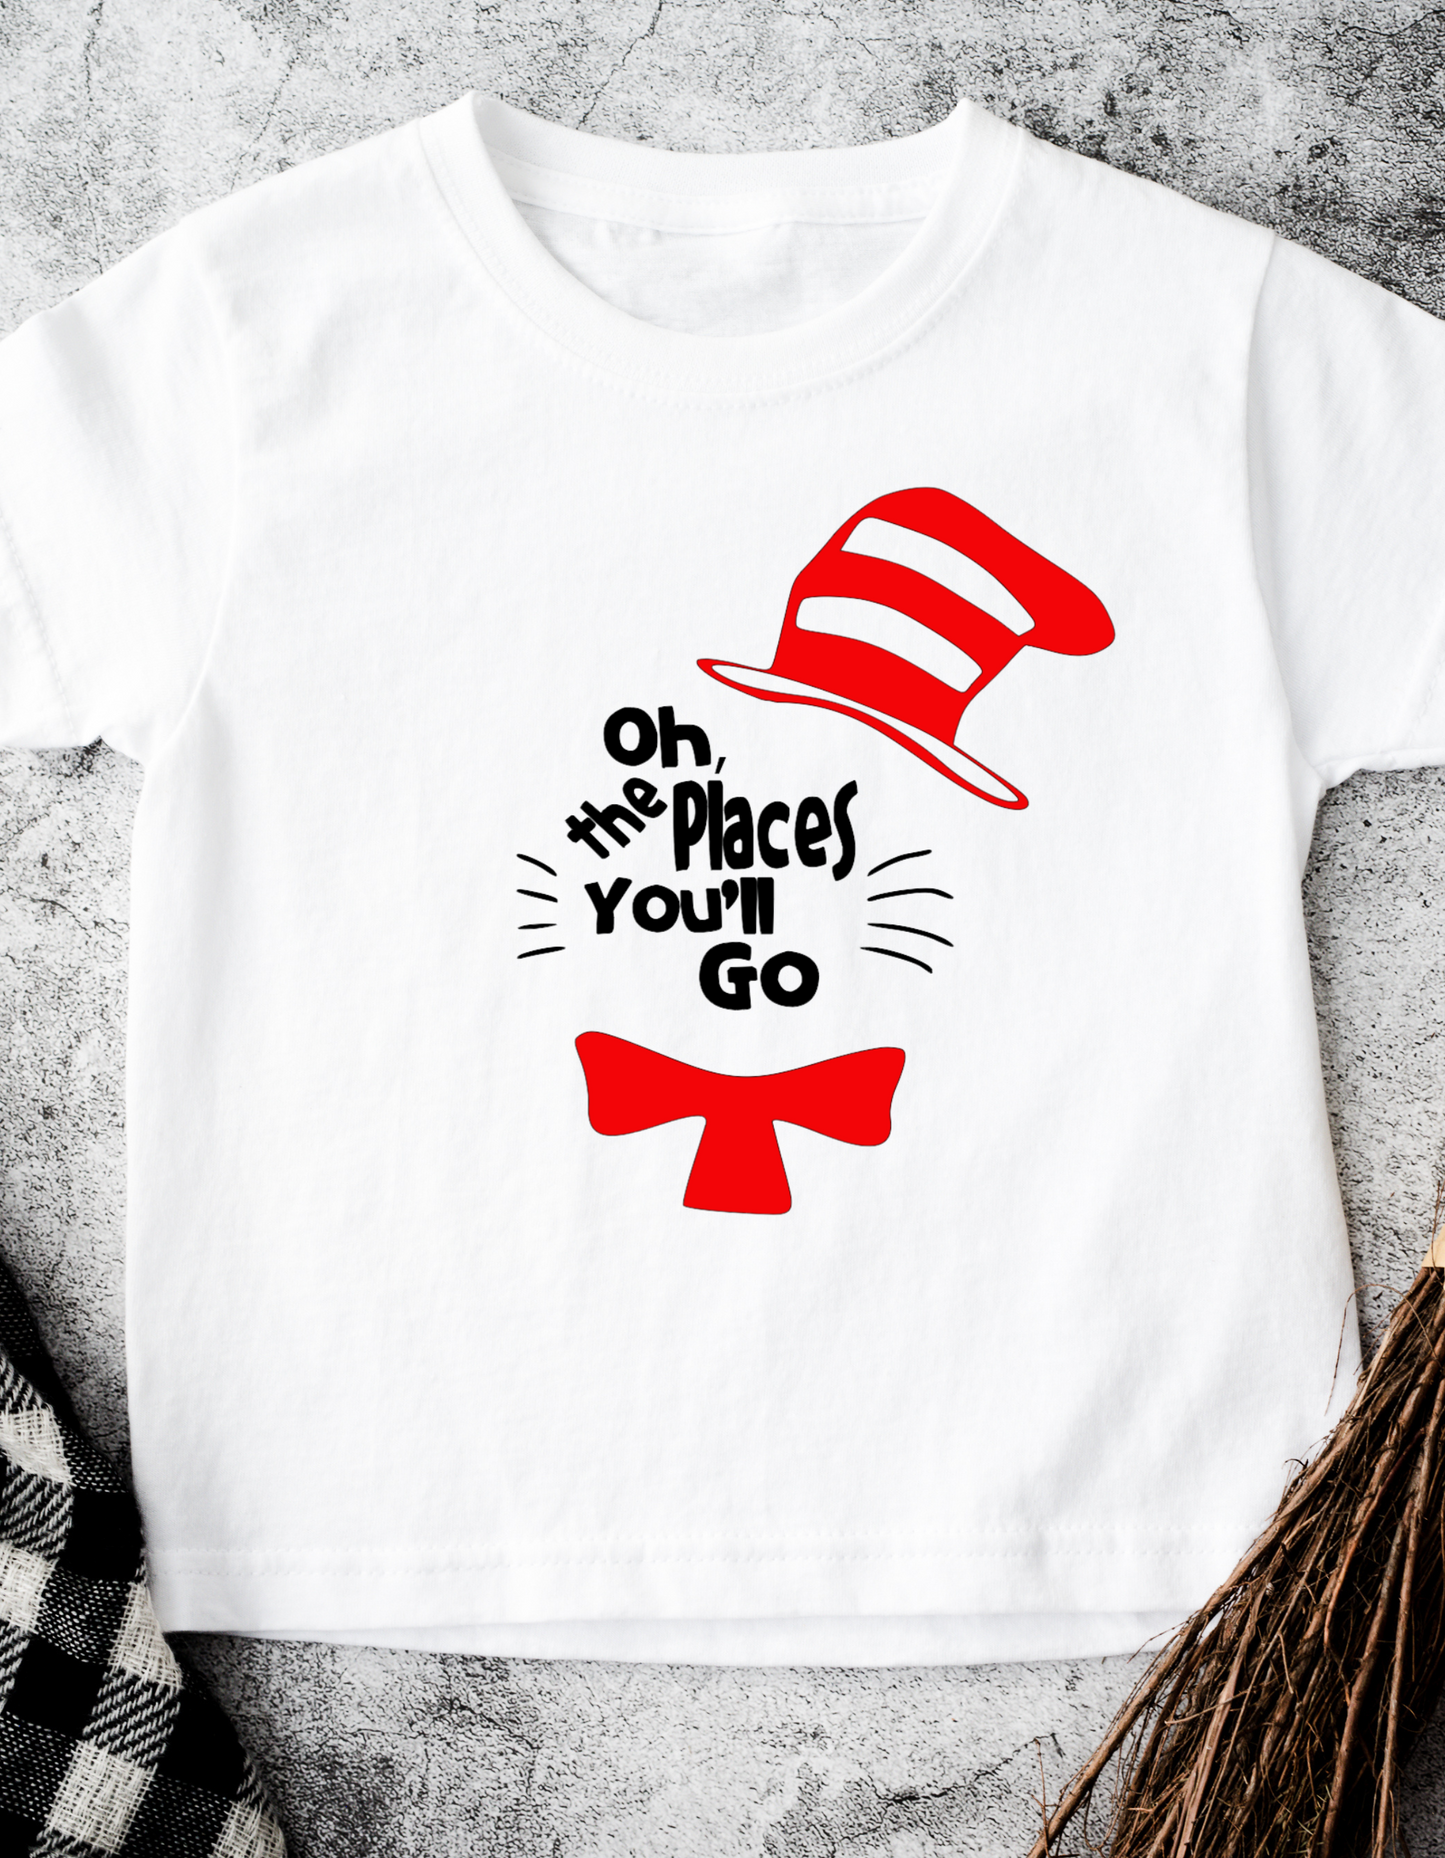 Oh the places you'll go tee